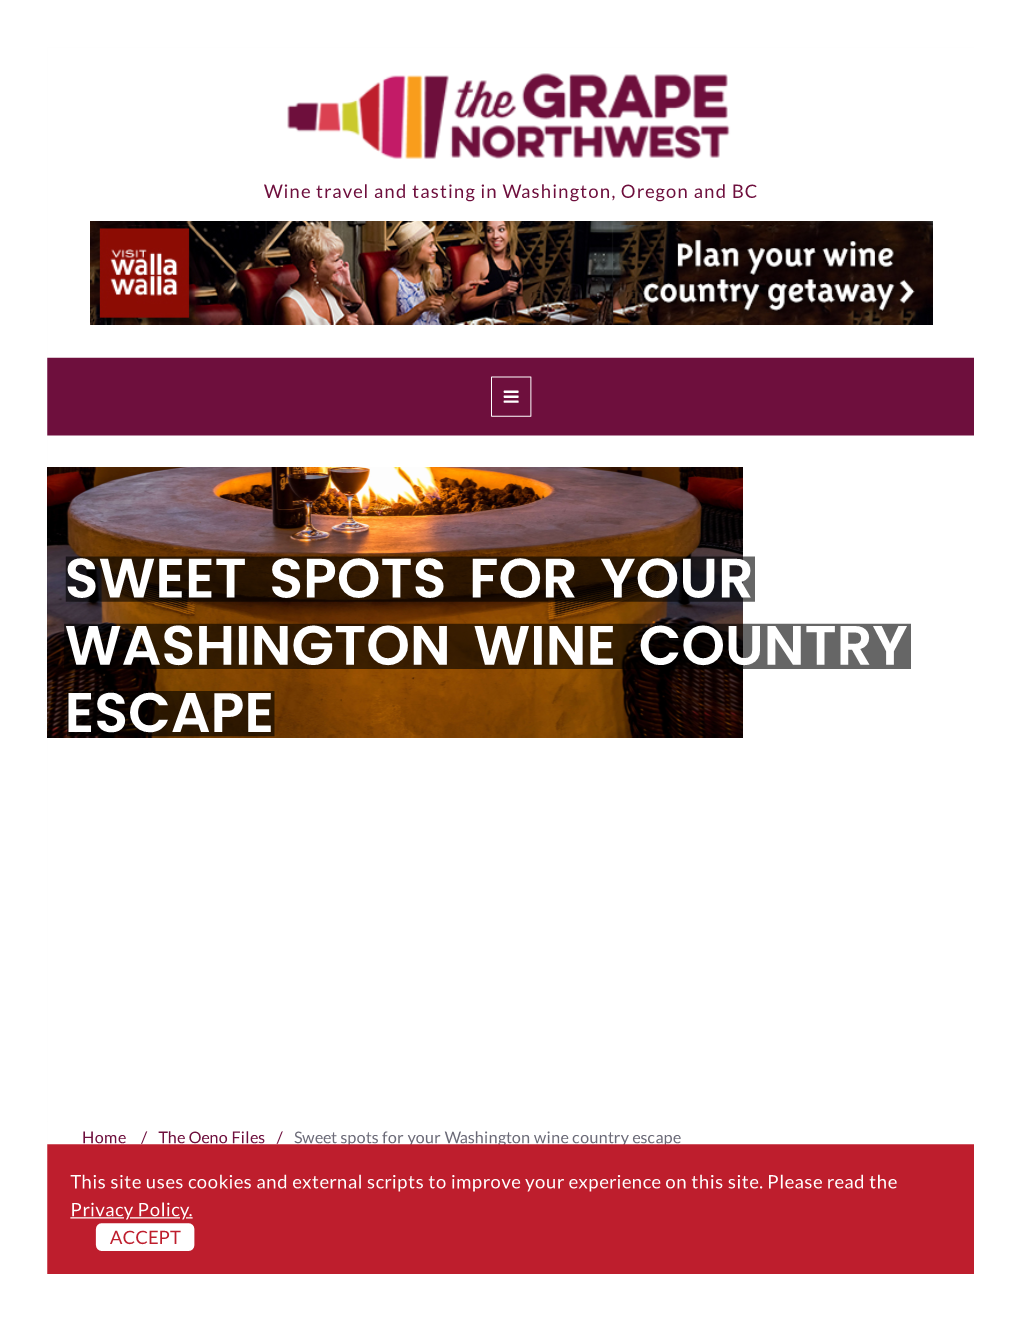 Sweet Spots for Your Washington Wine Country Escape